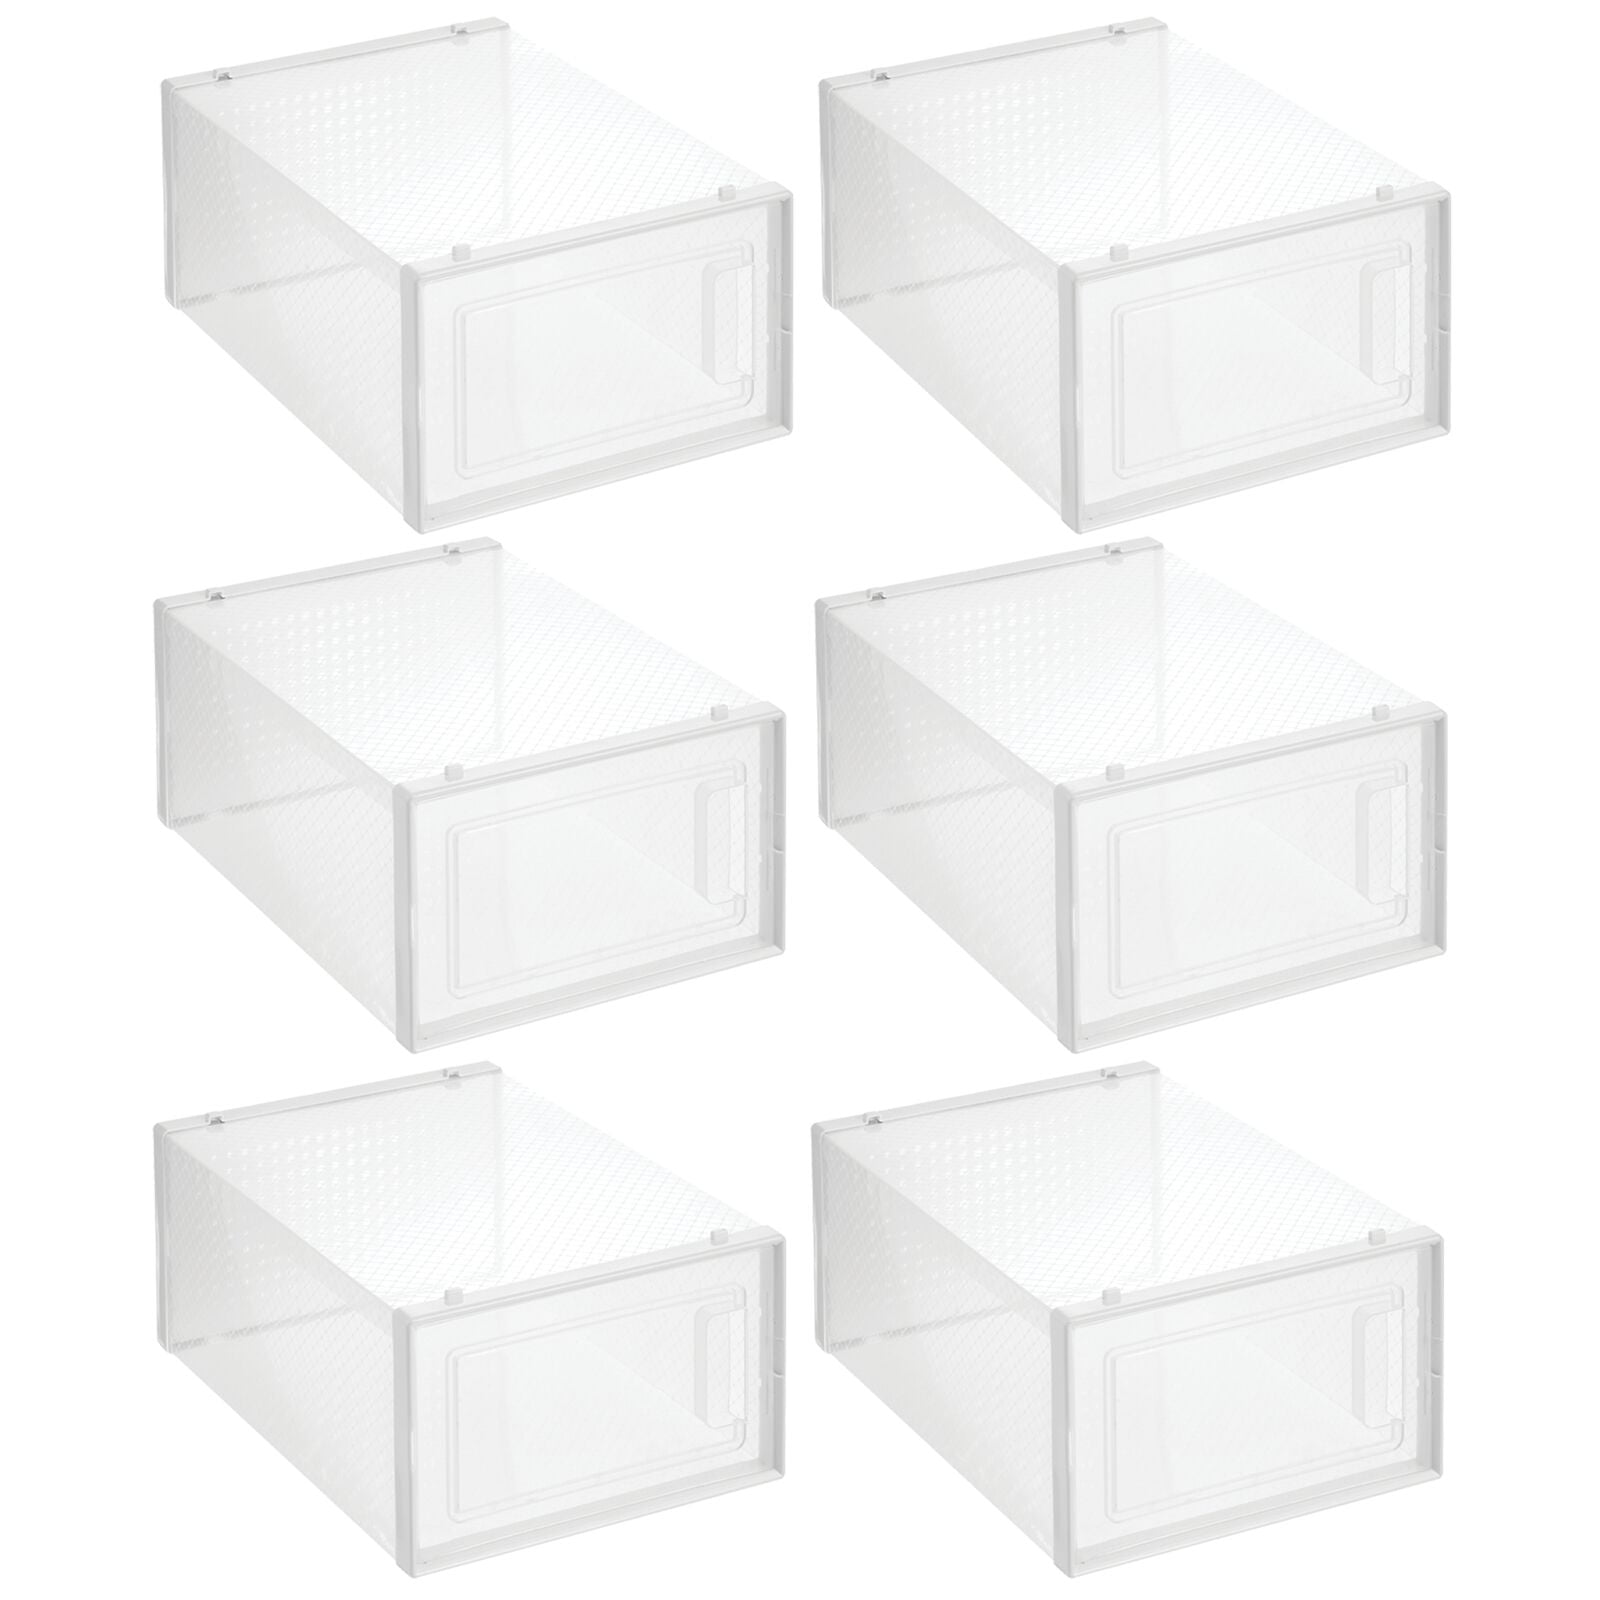 Wedges Heels 8 Pack Holds Sandals mDesign Compact Plastic Double Shoe Slot Stacker and Organizer Rack Flats Sneakers Clear Frost Closet Space-Saver